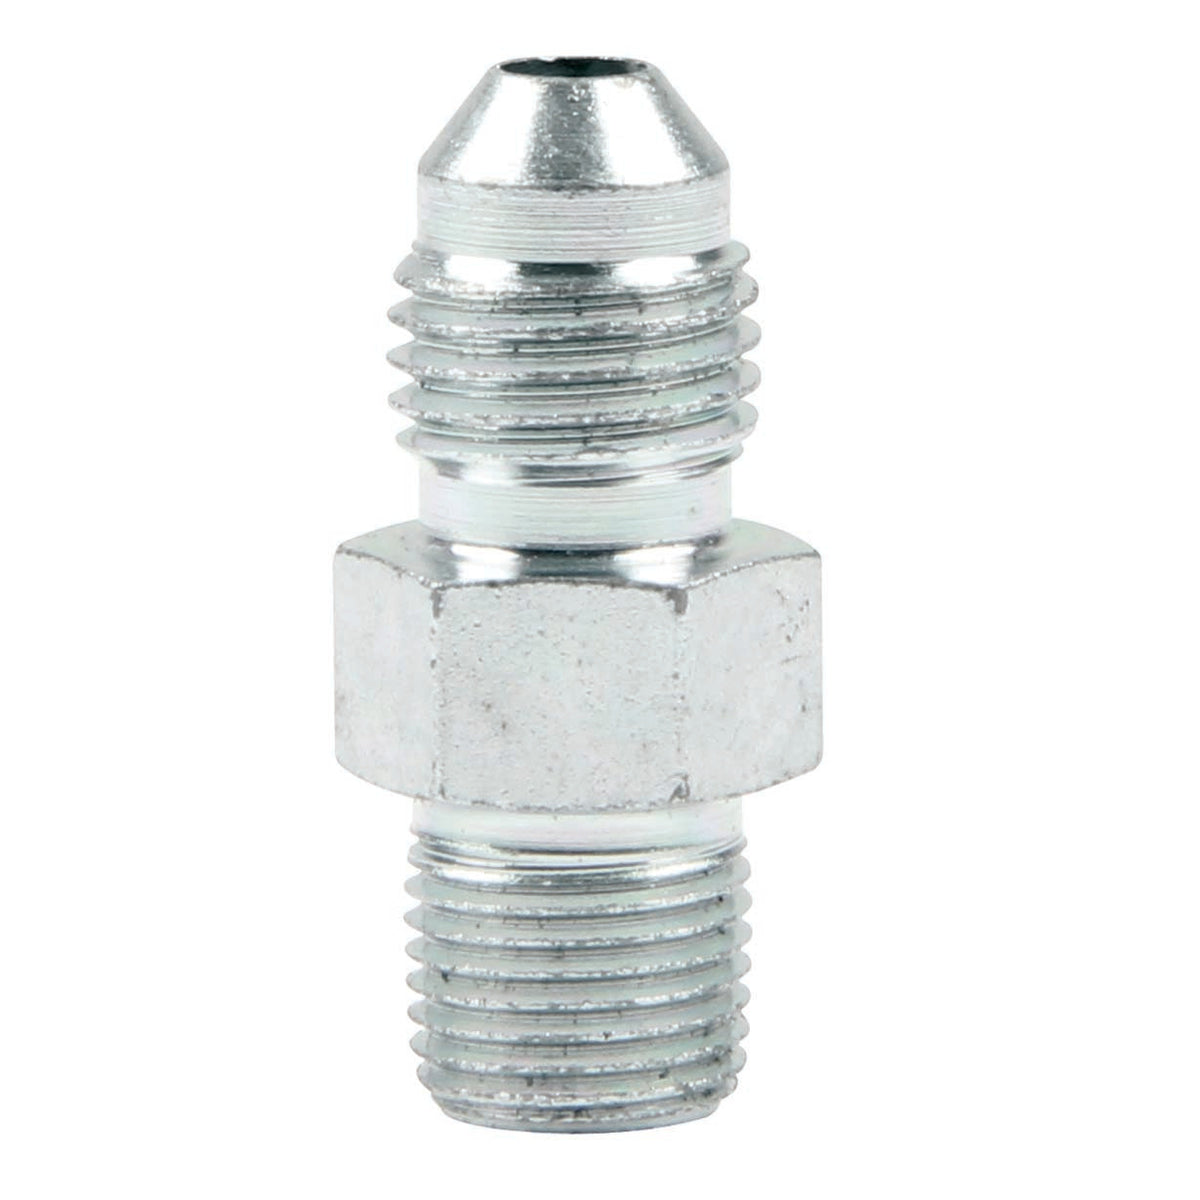 Adapter Fittings -4 to 1/8 NPT 50pk